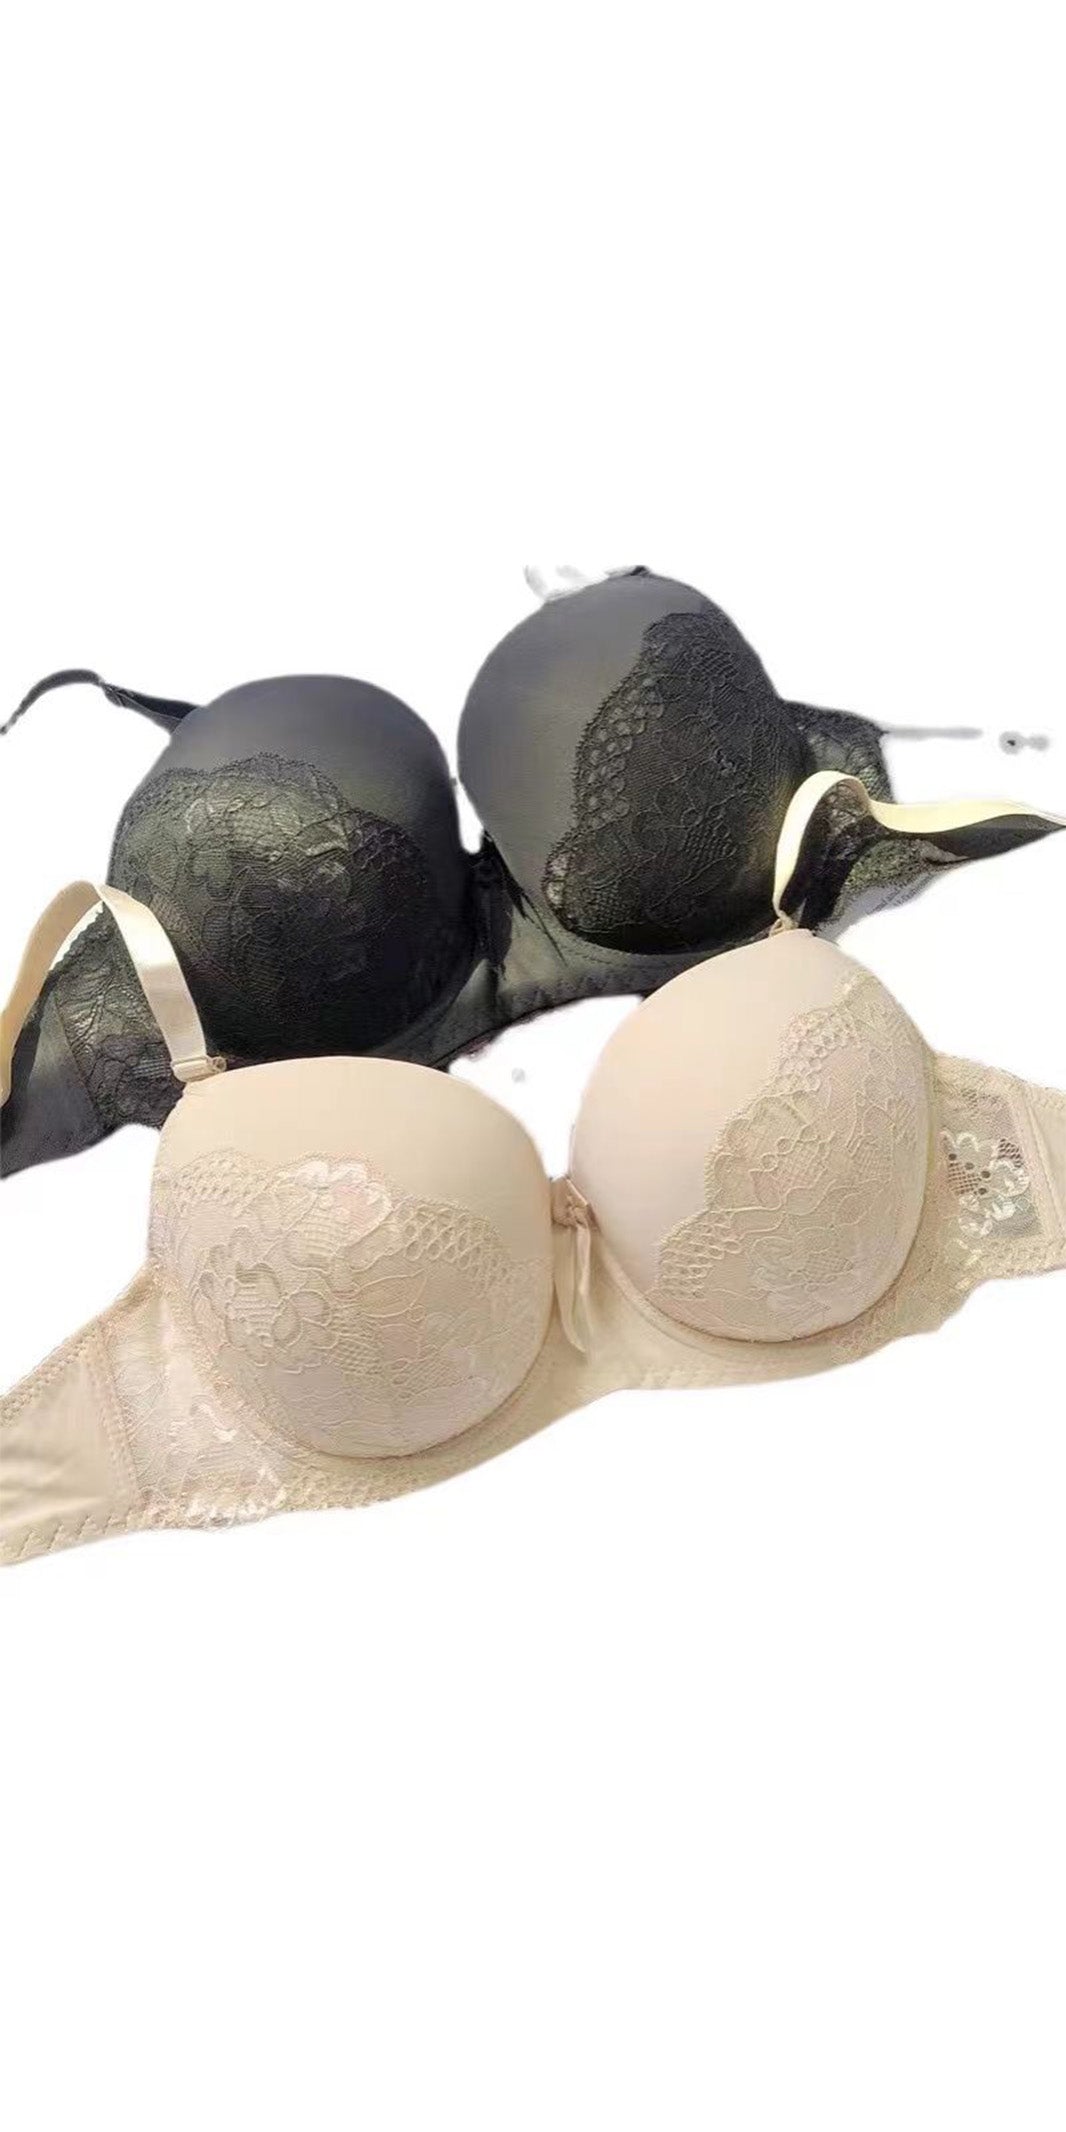 Sensual Romance Embroidered Lace Bra and Panties Set